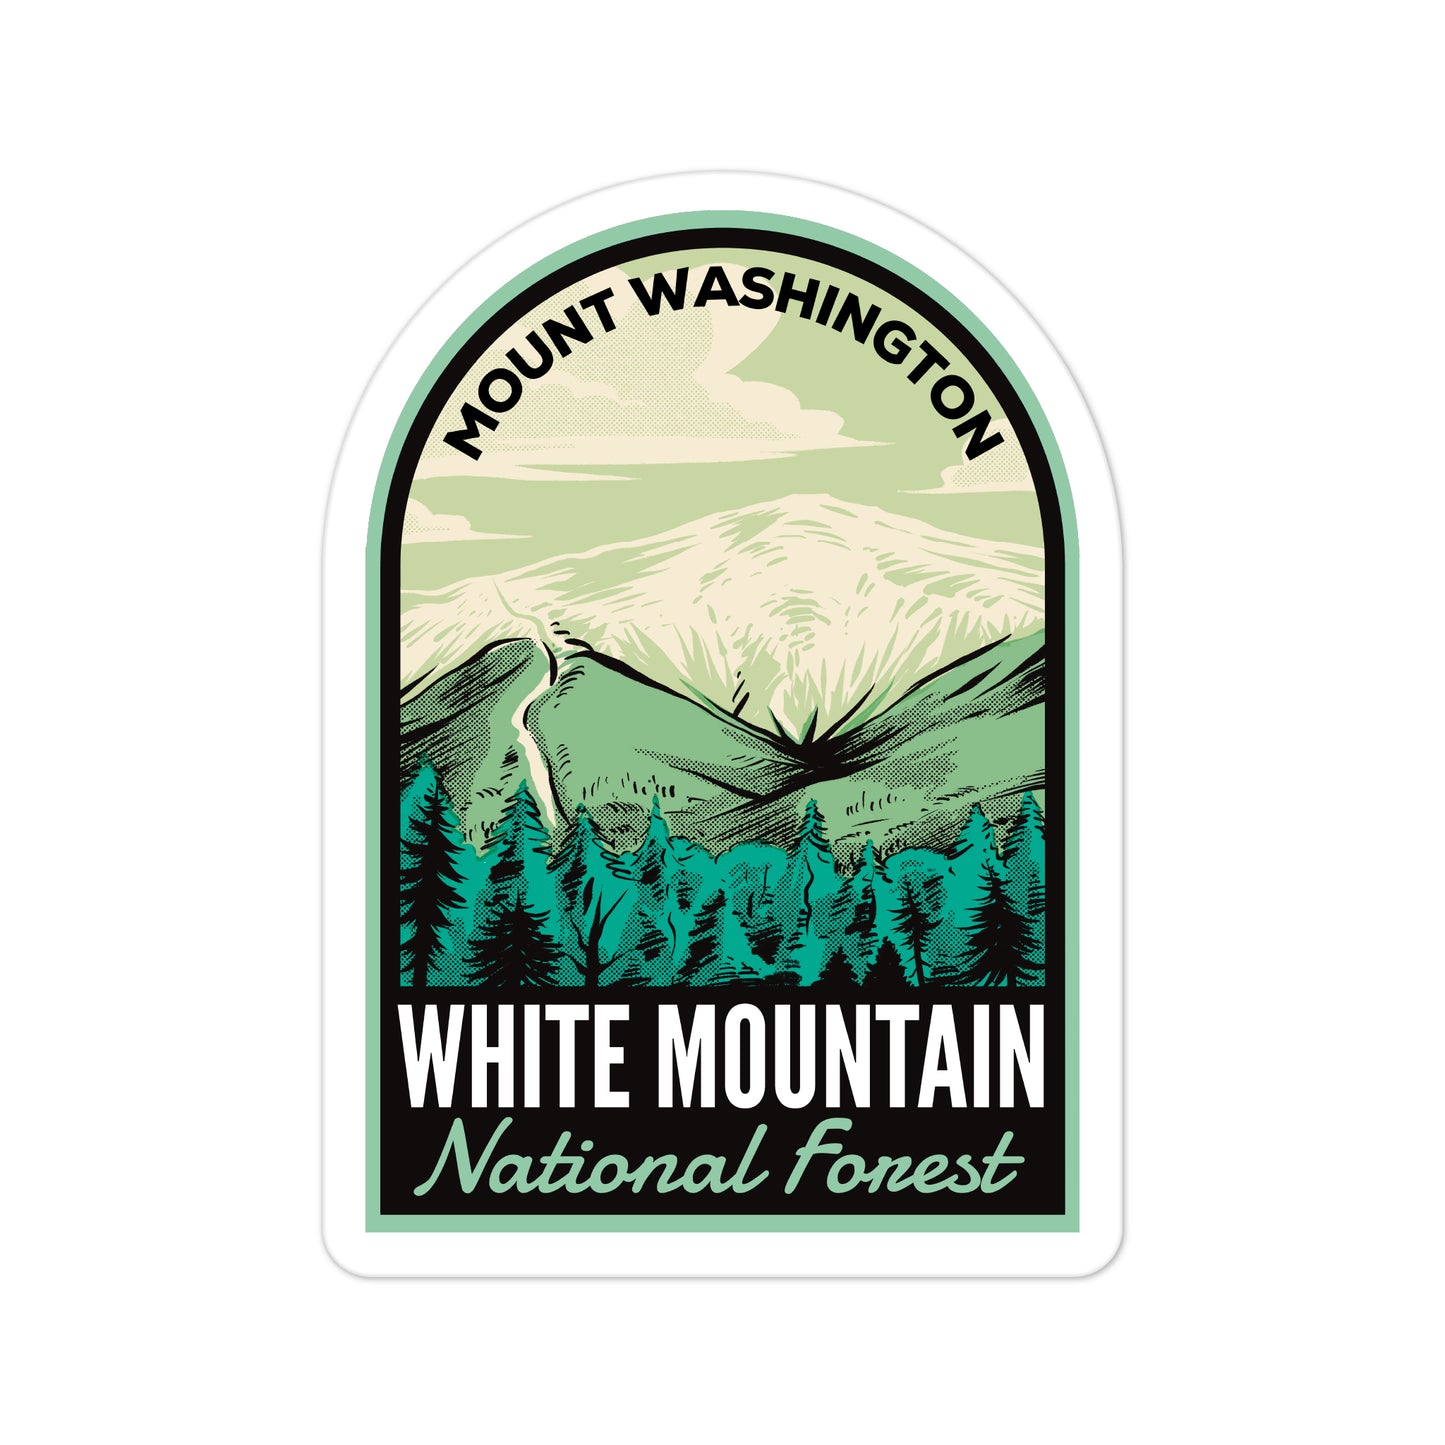 A sticker of White Mountain National Forest